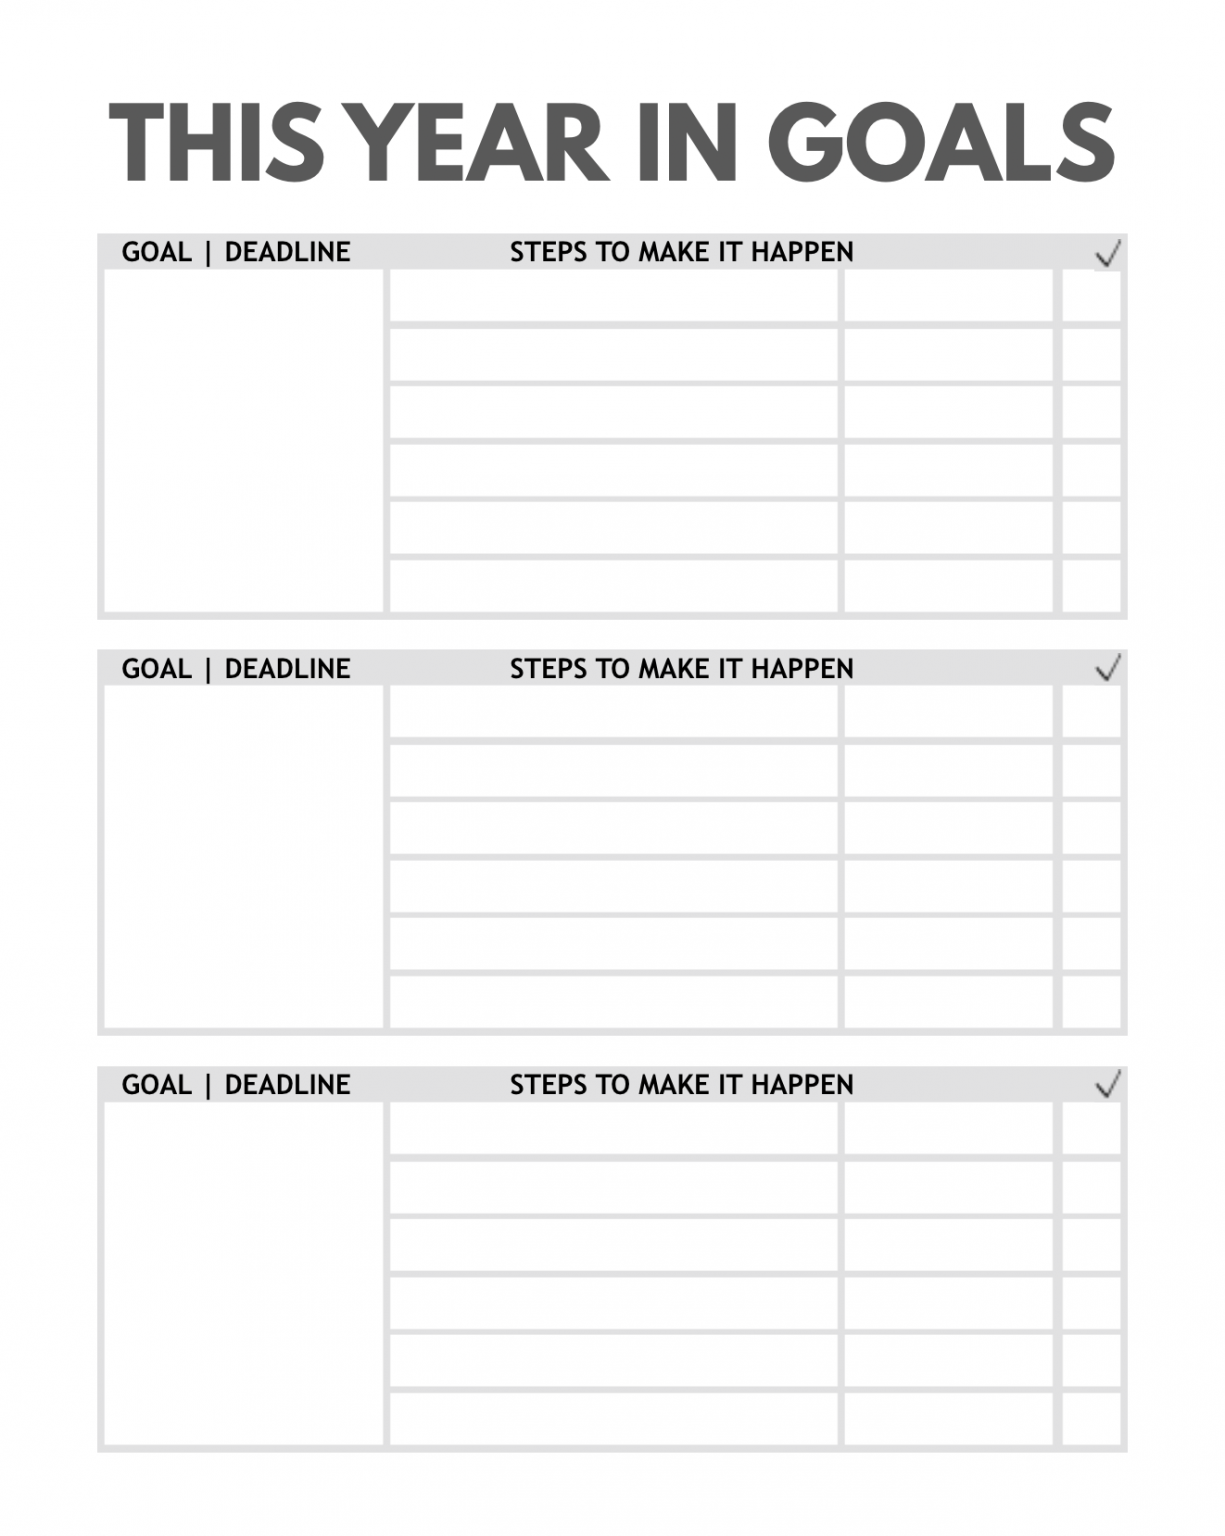 goal-action-plan-undated-agenda-to-track-your-goals-for-the-year